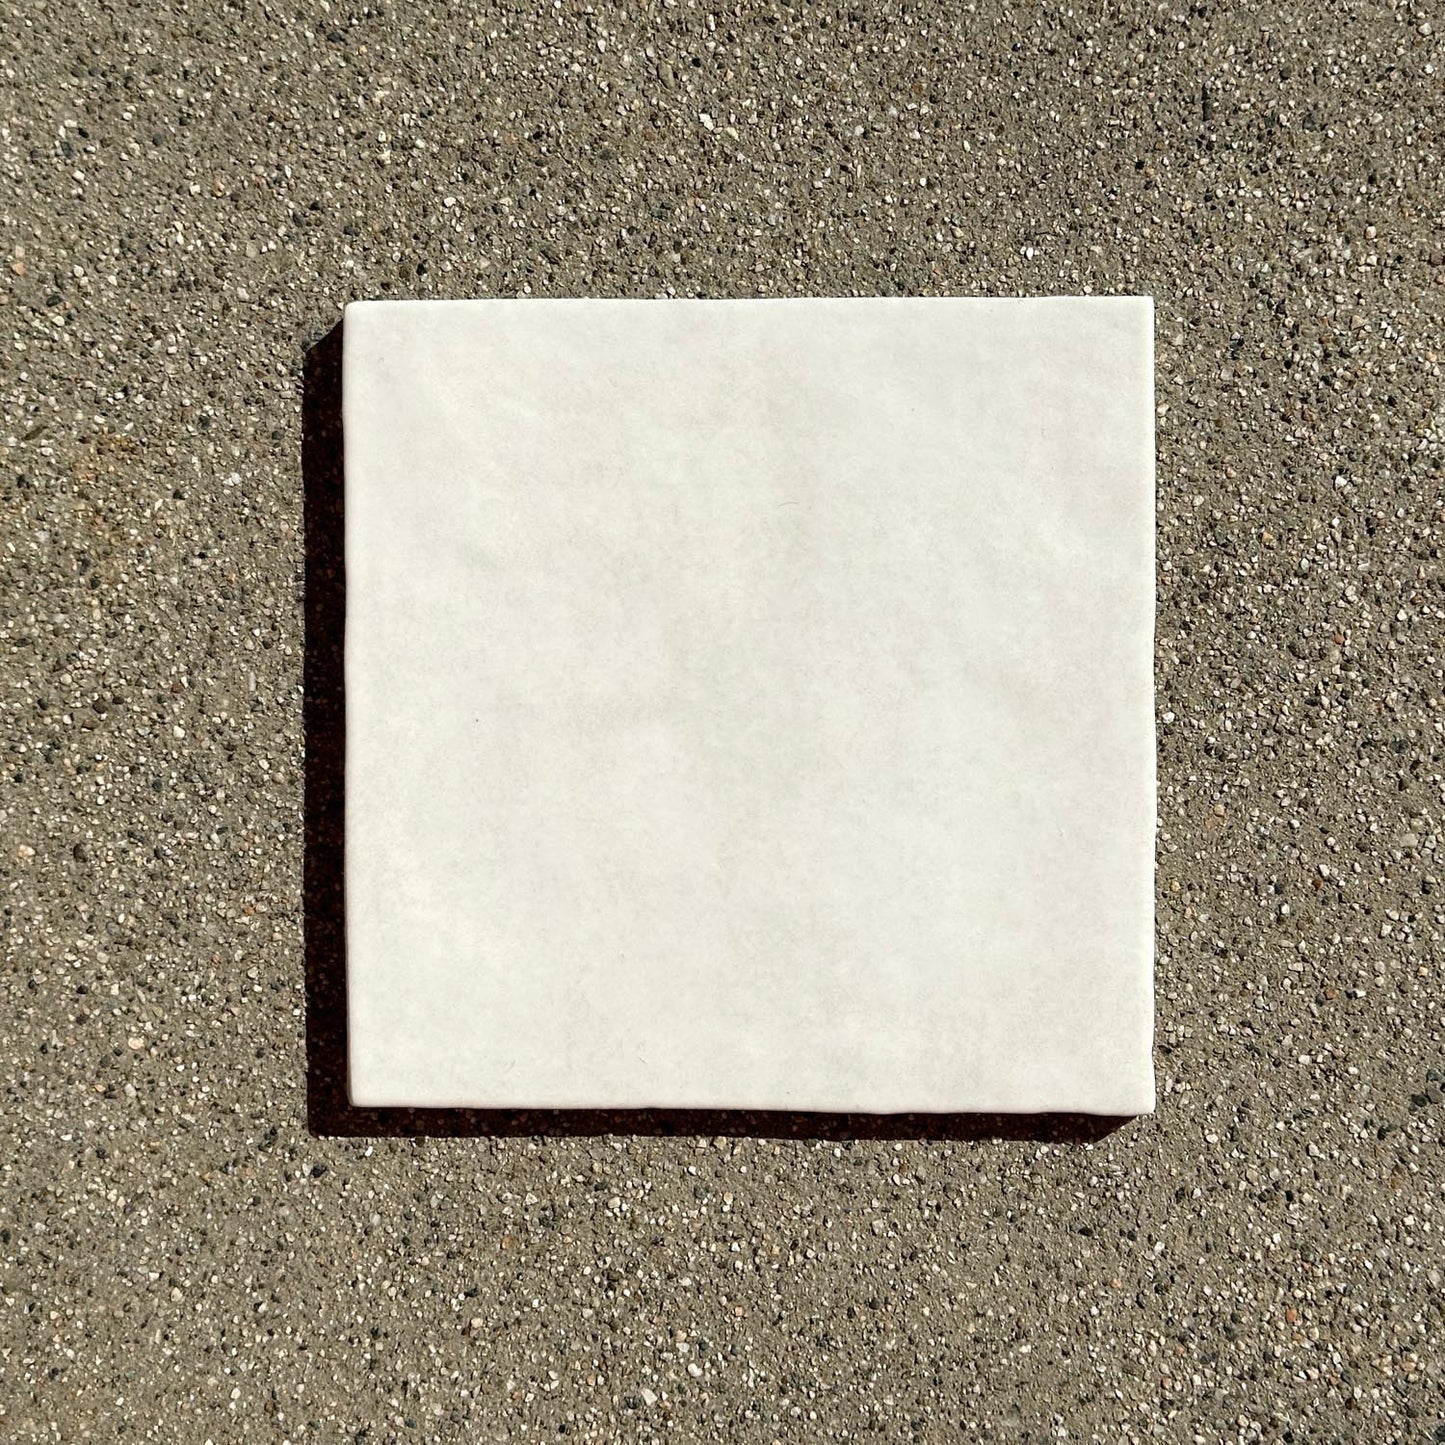 Bedrosians Tile & Stone | Cloé 5x5 Glossy Wall Tile in White